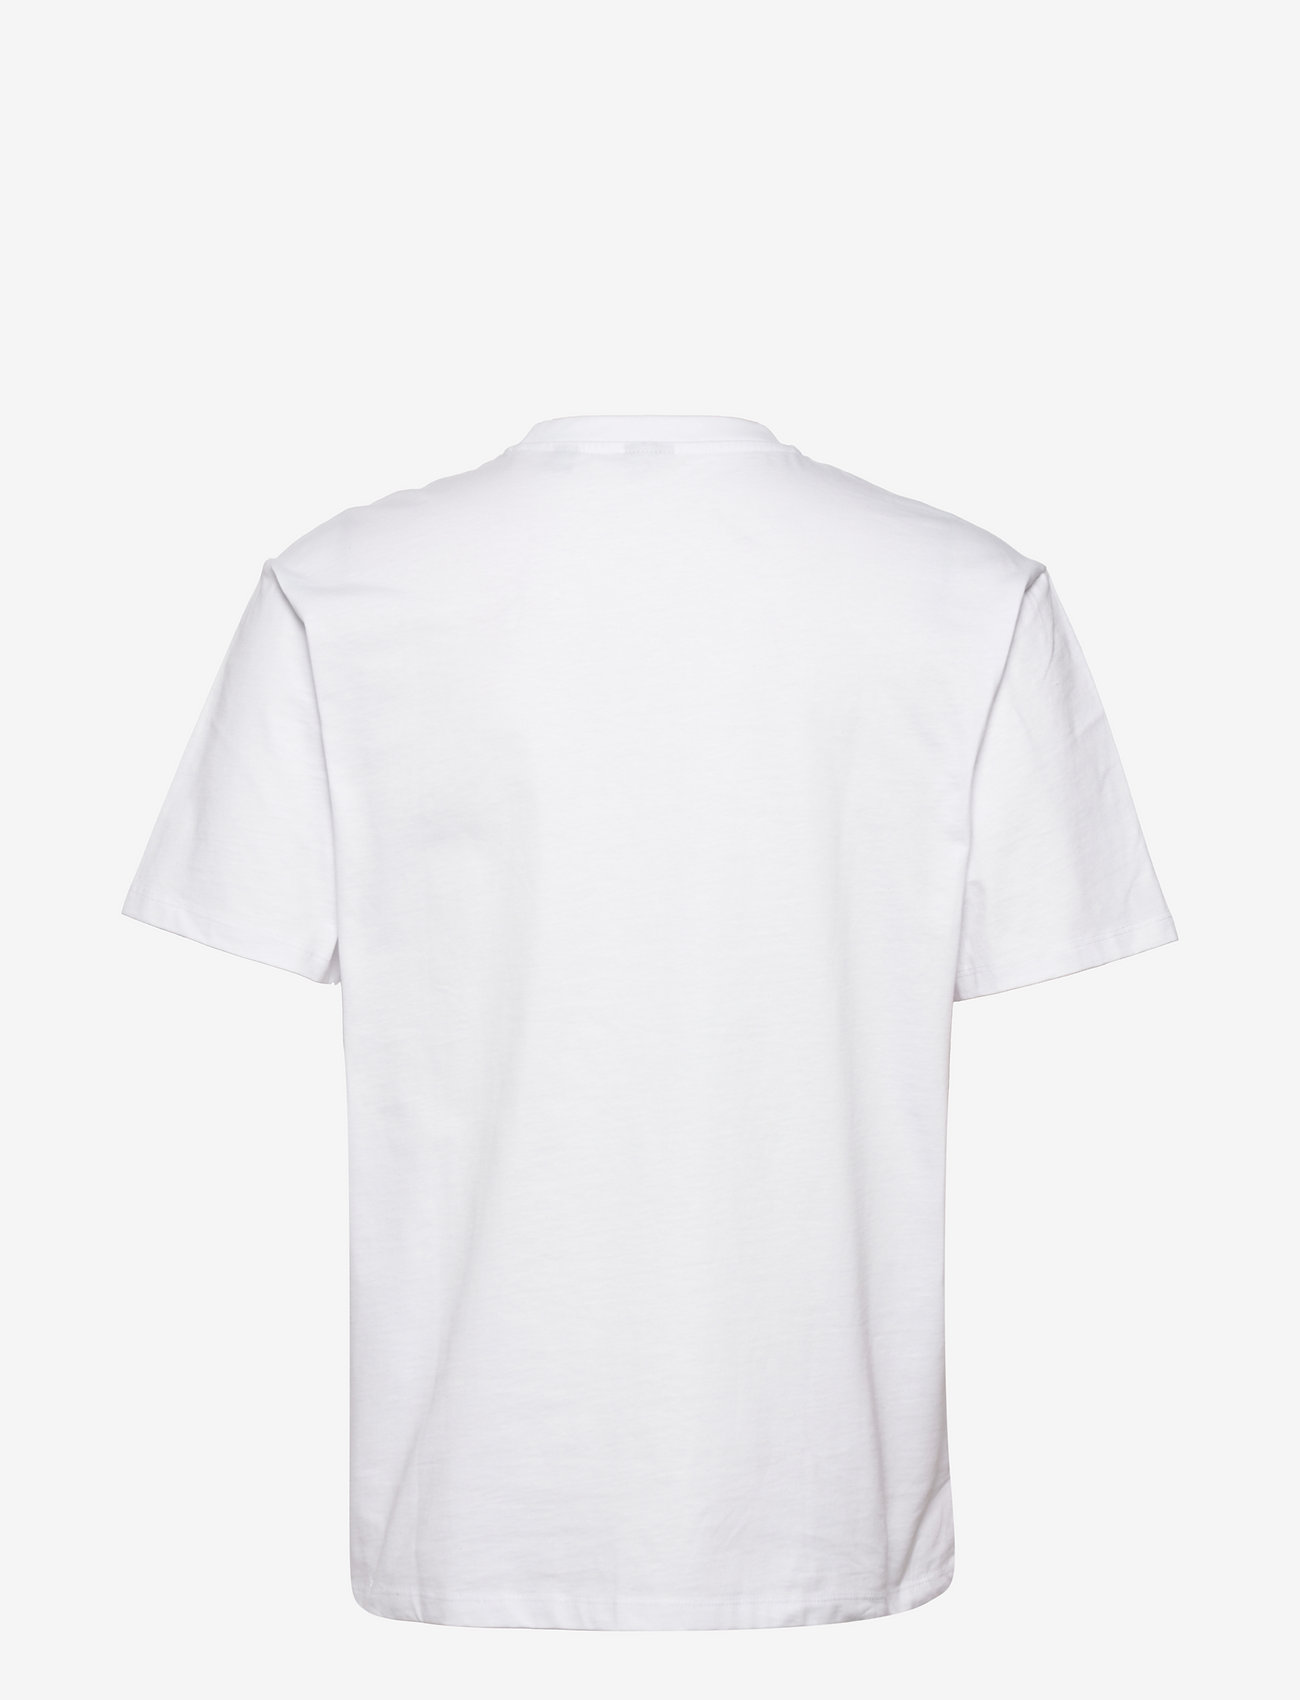 ONLY & SONS - ONSFRED LIFE RLX SS TEE NOOS - madalaimad hinnad - bright white - 1